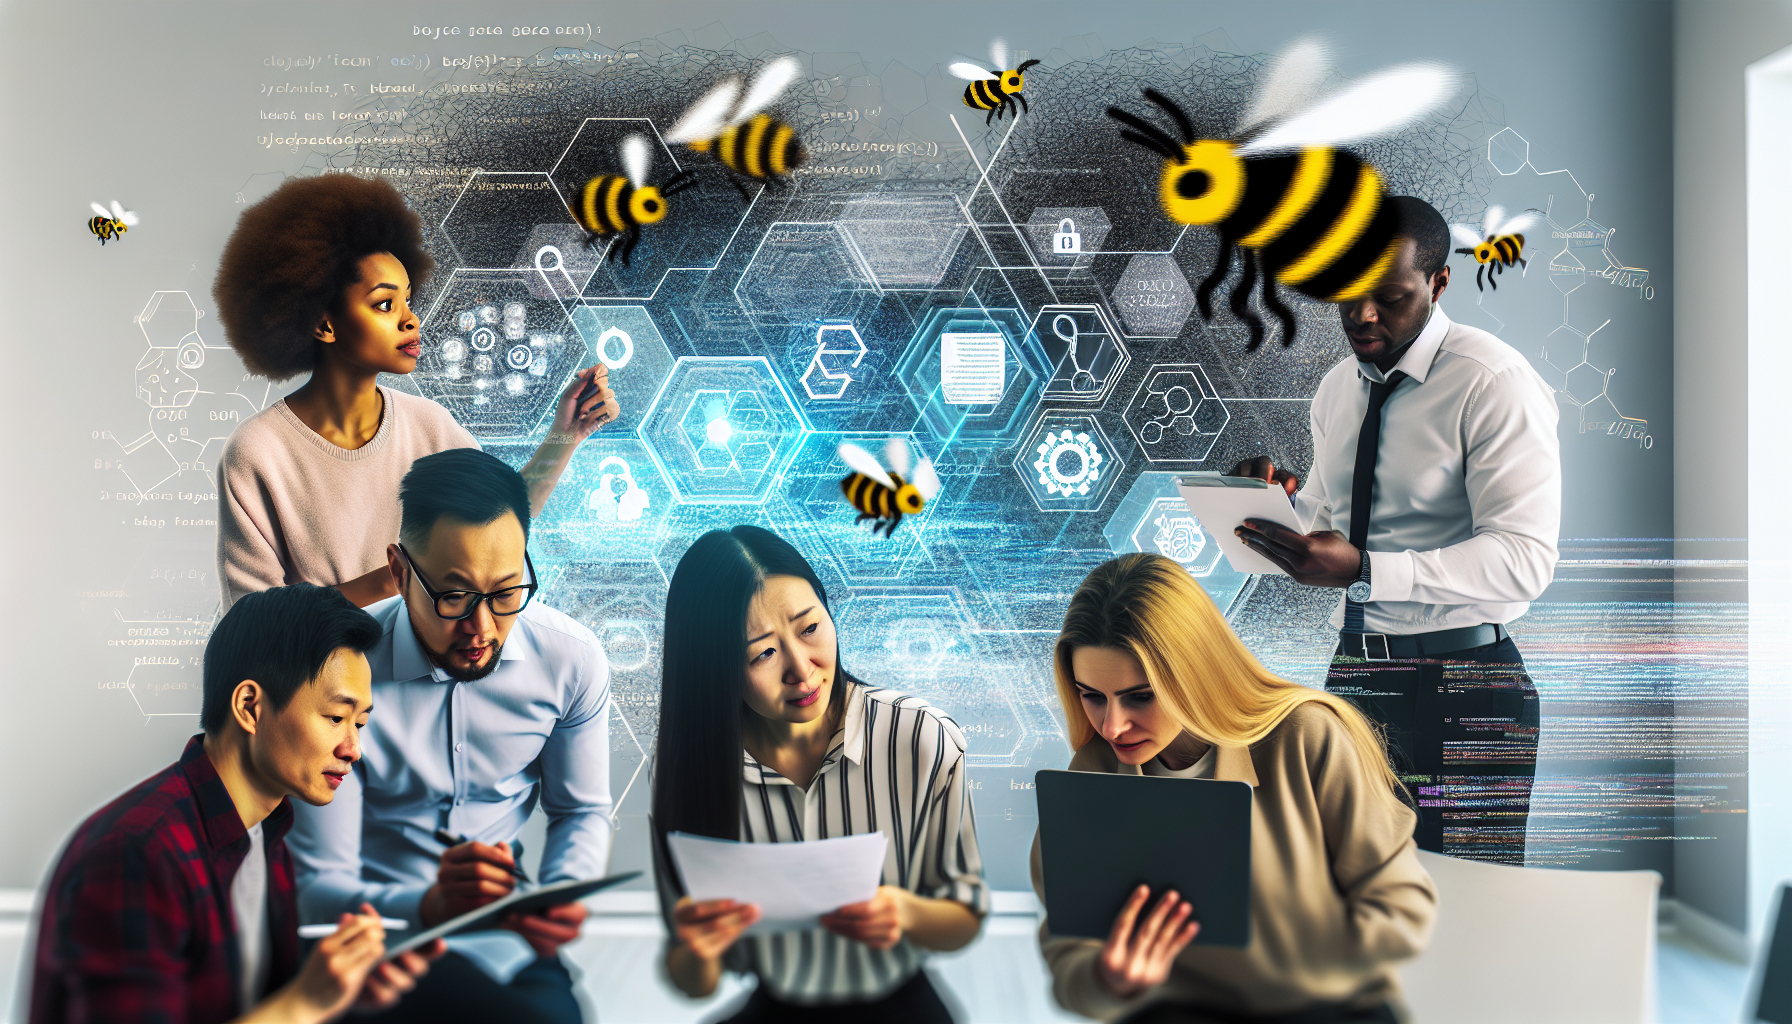 The Bee Techy team working on blockchain security solutions